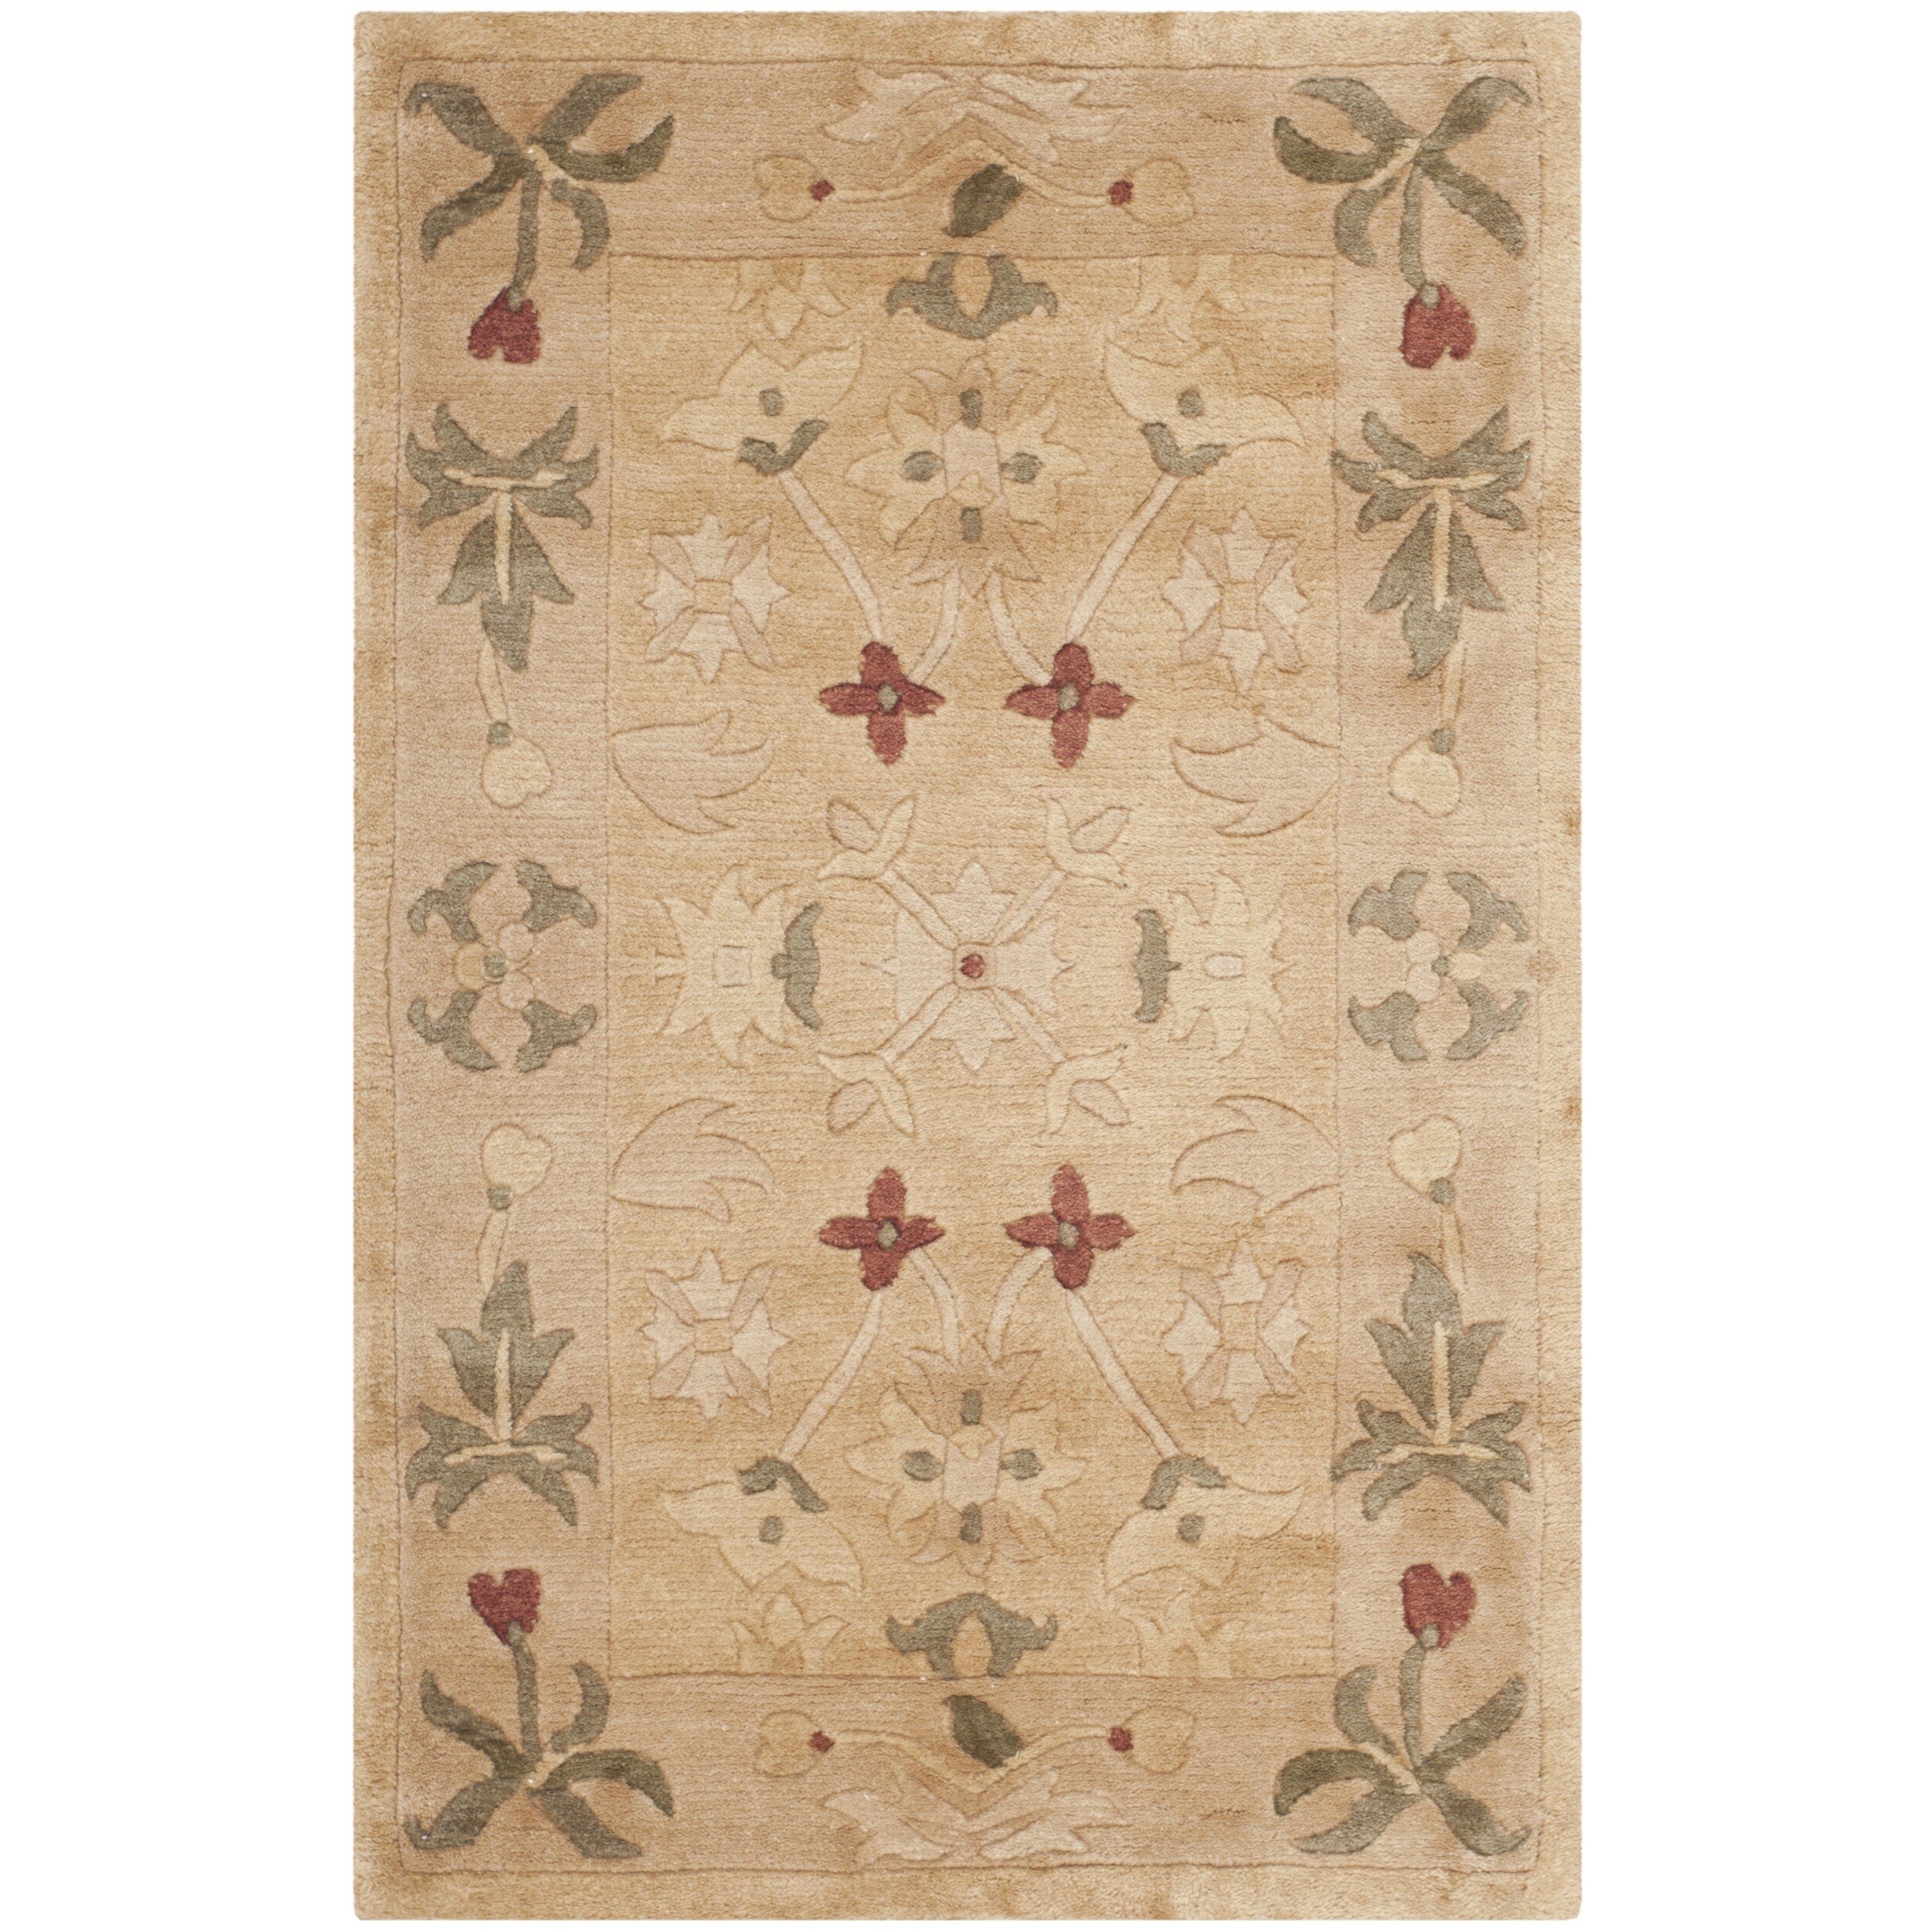 Safavieh Hand knotted Tibetan Multicolored Wool Accent Rug (2 X 3)